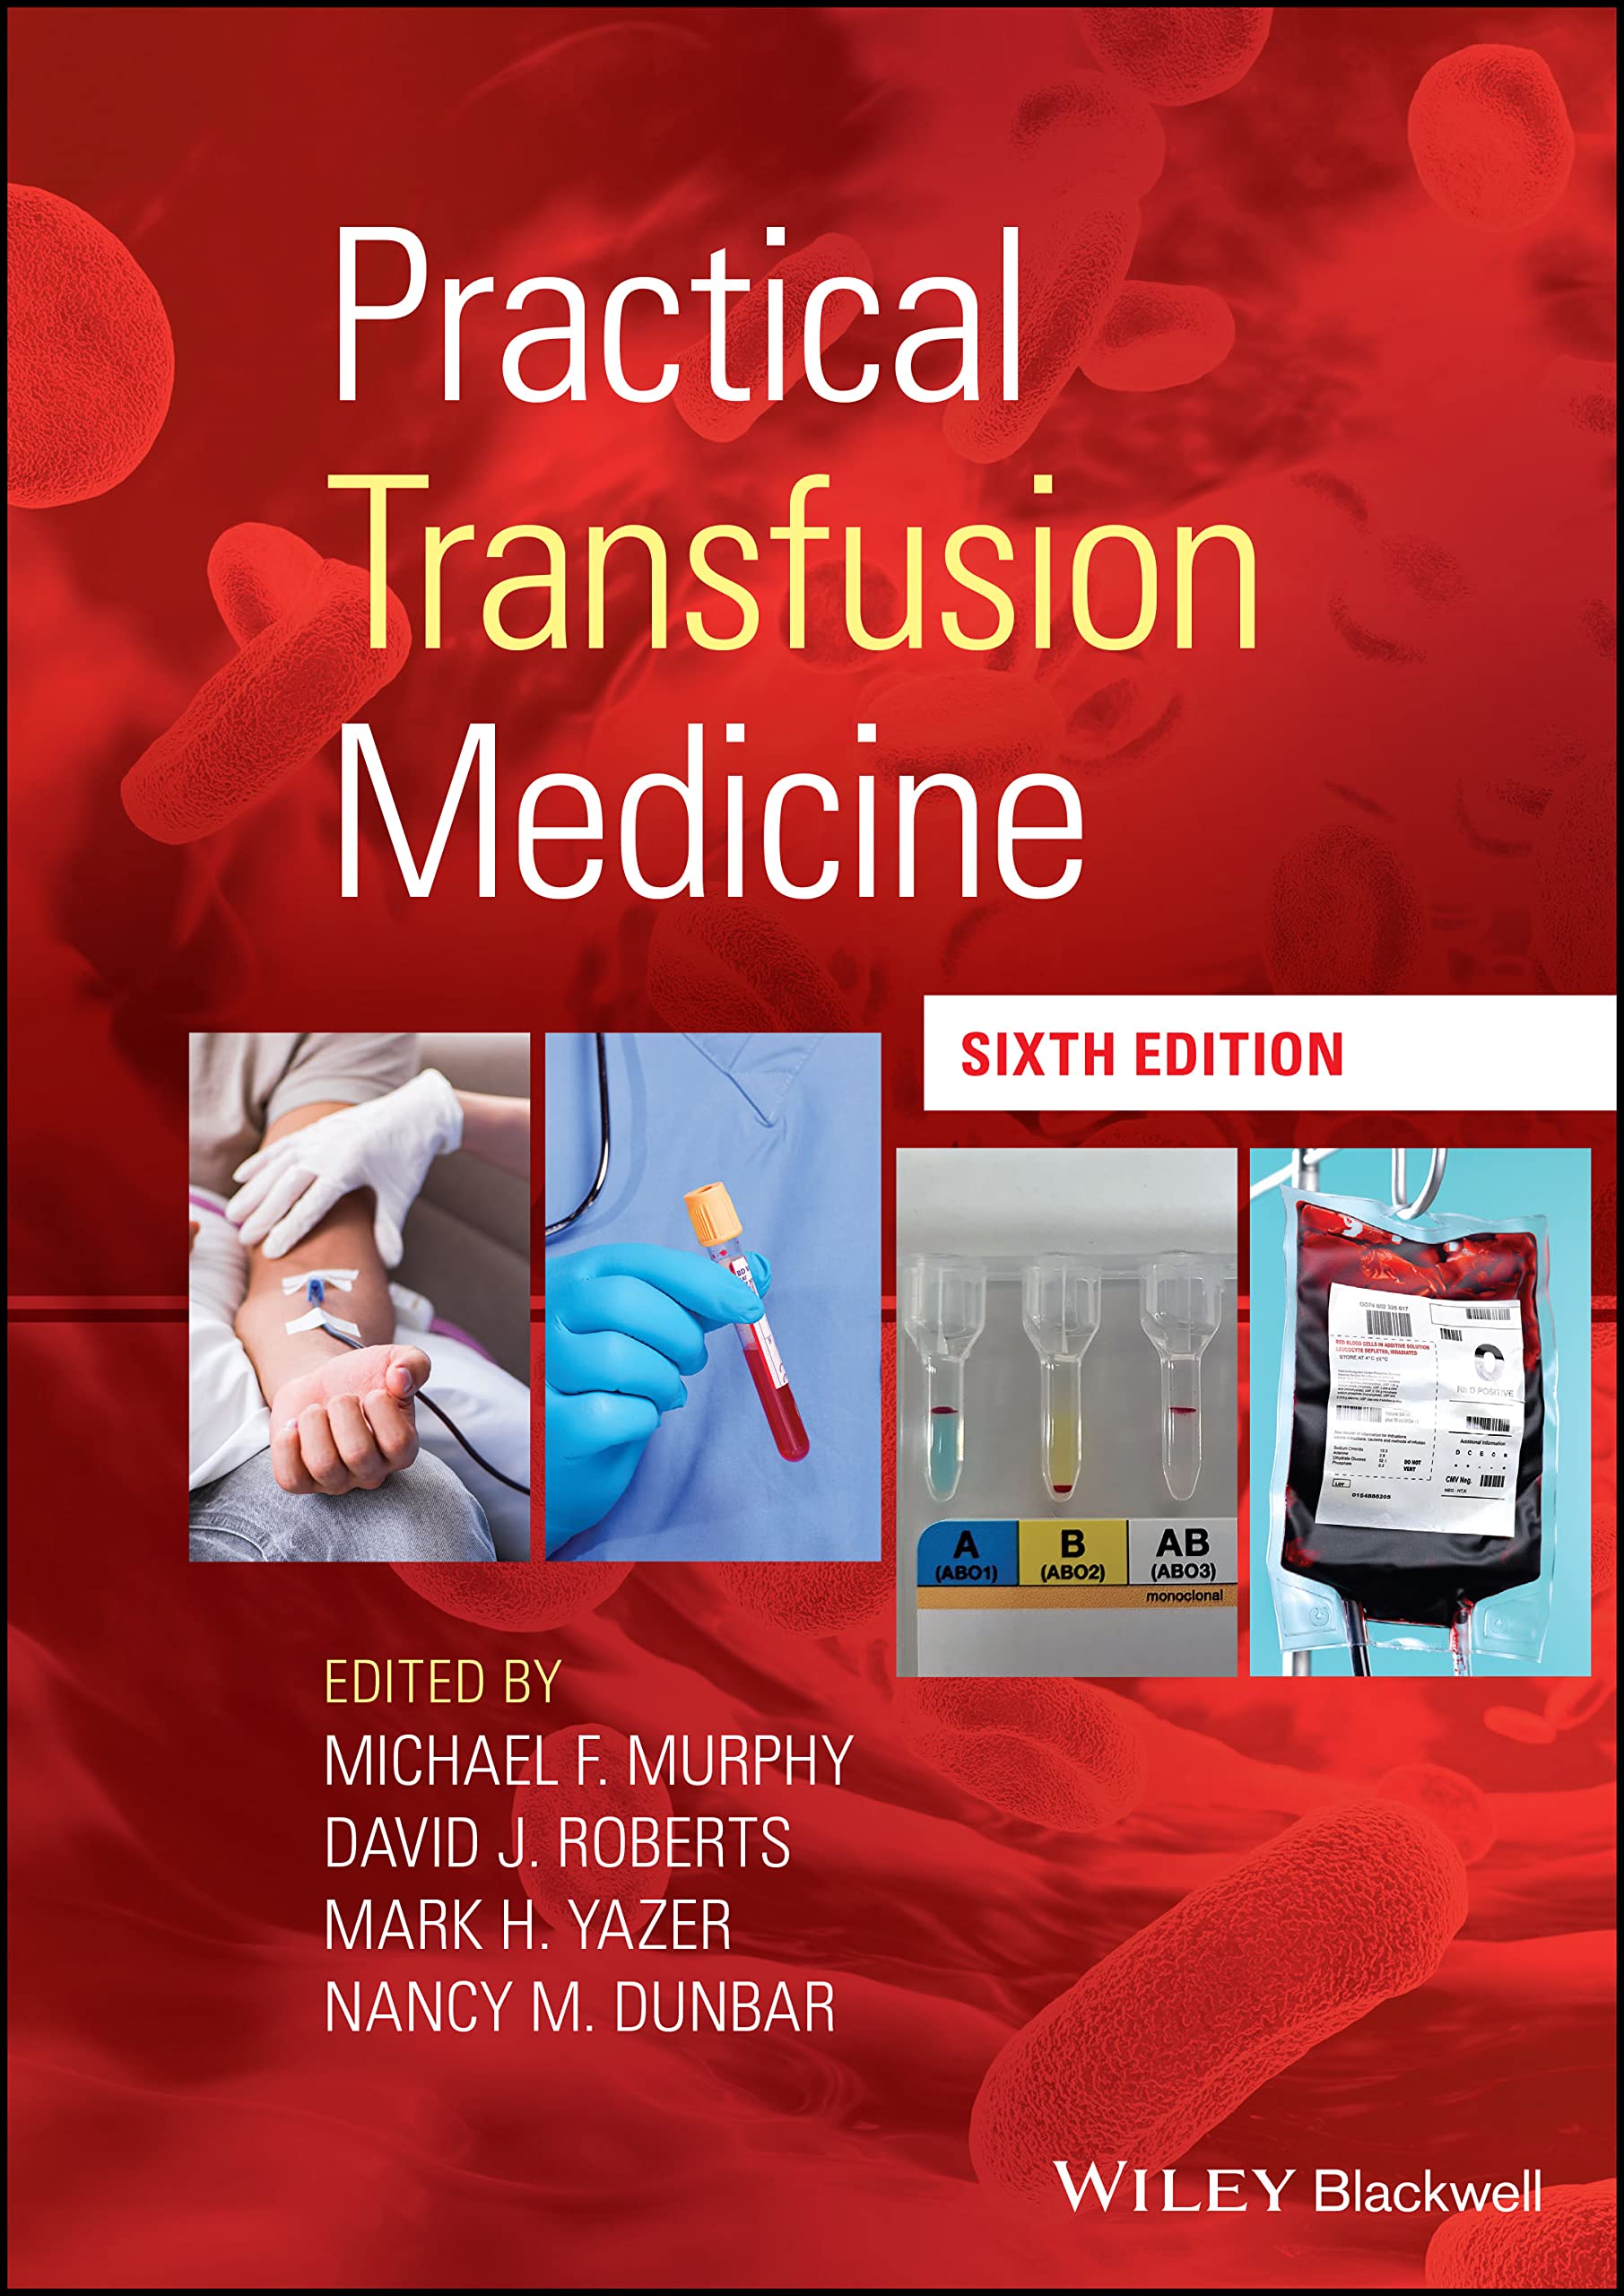 Practical Transfusion Medicine, 6th Edition  by Michael F. Murphy